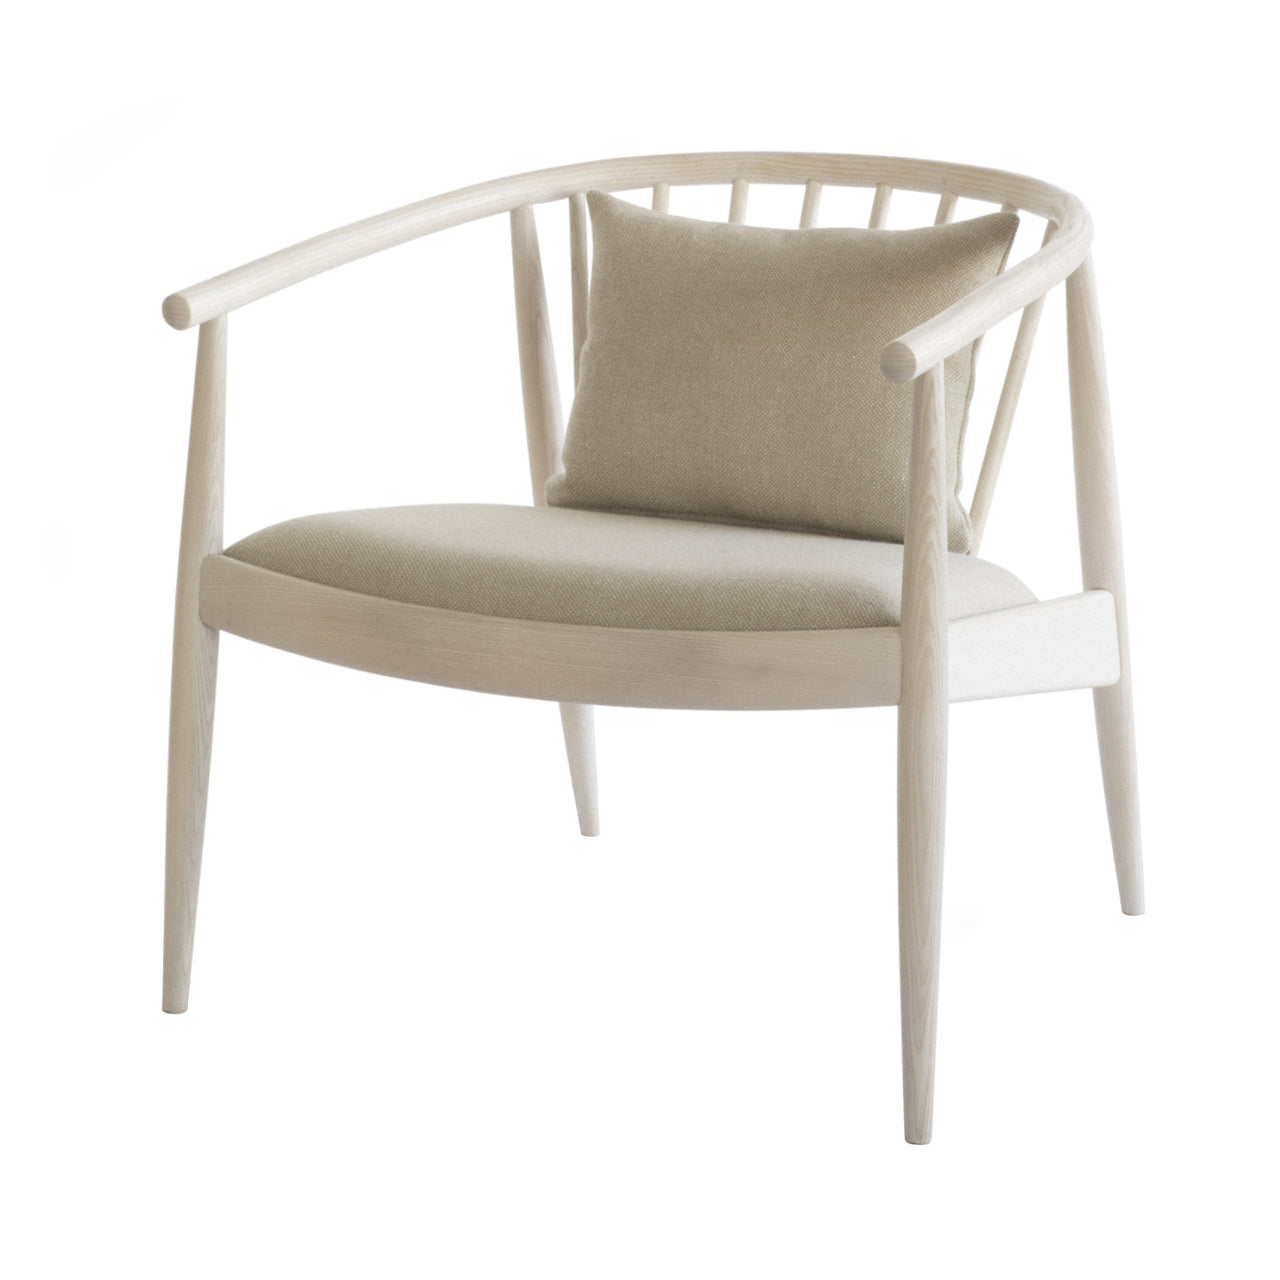 Reprise Chair: Upholstered + Natural Ash + With Back Cushion